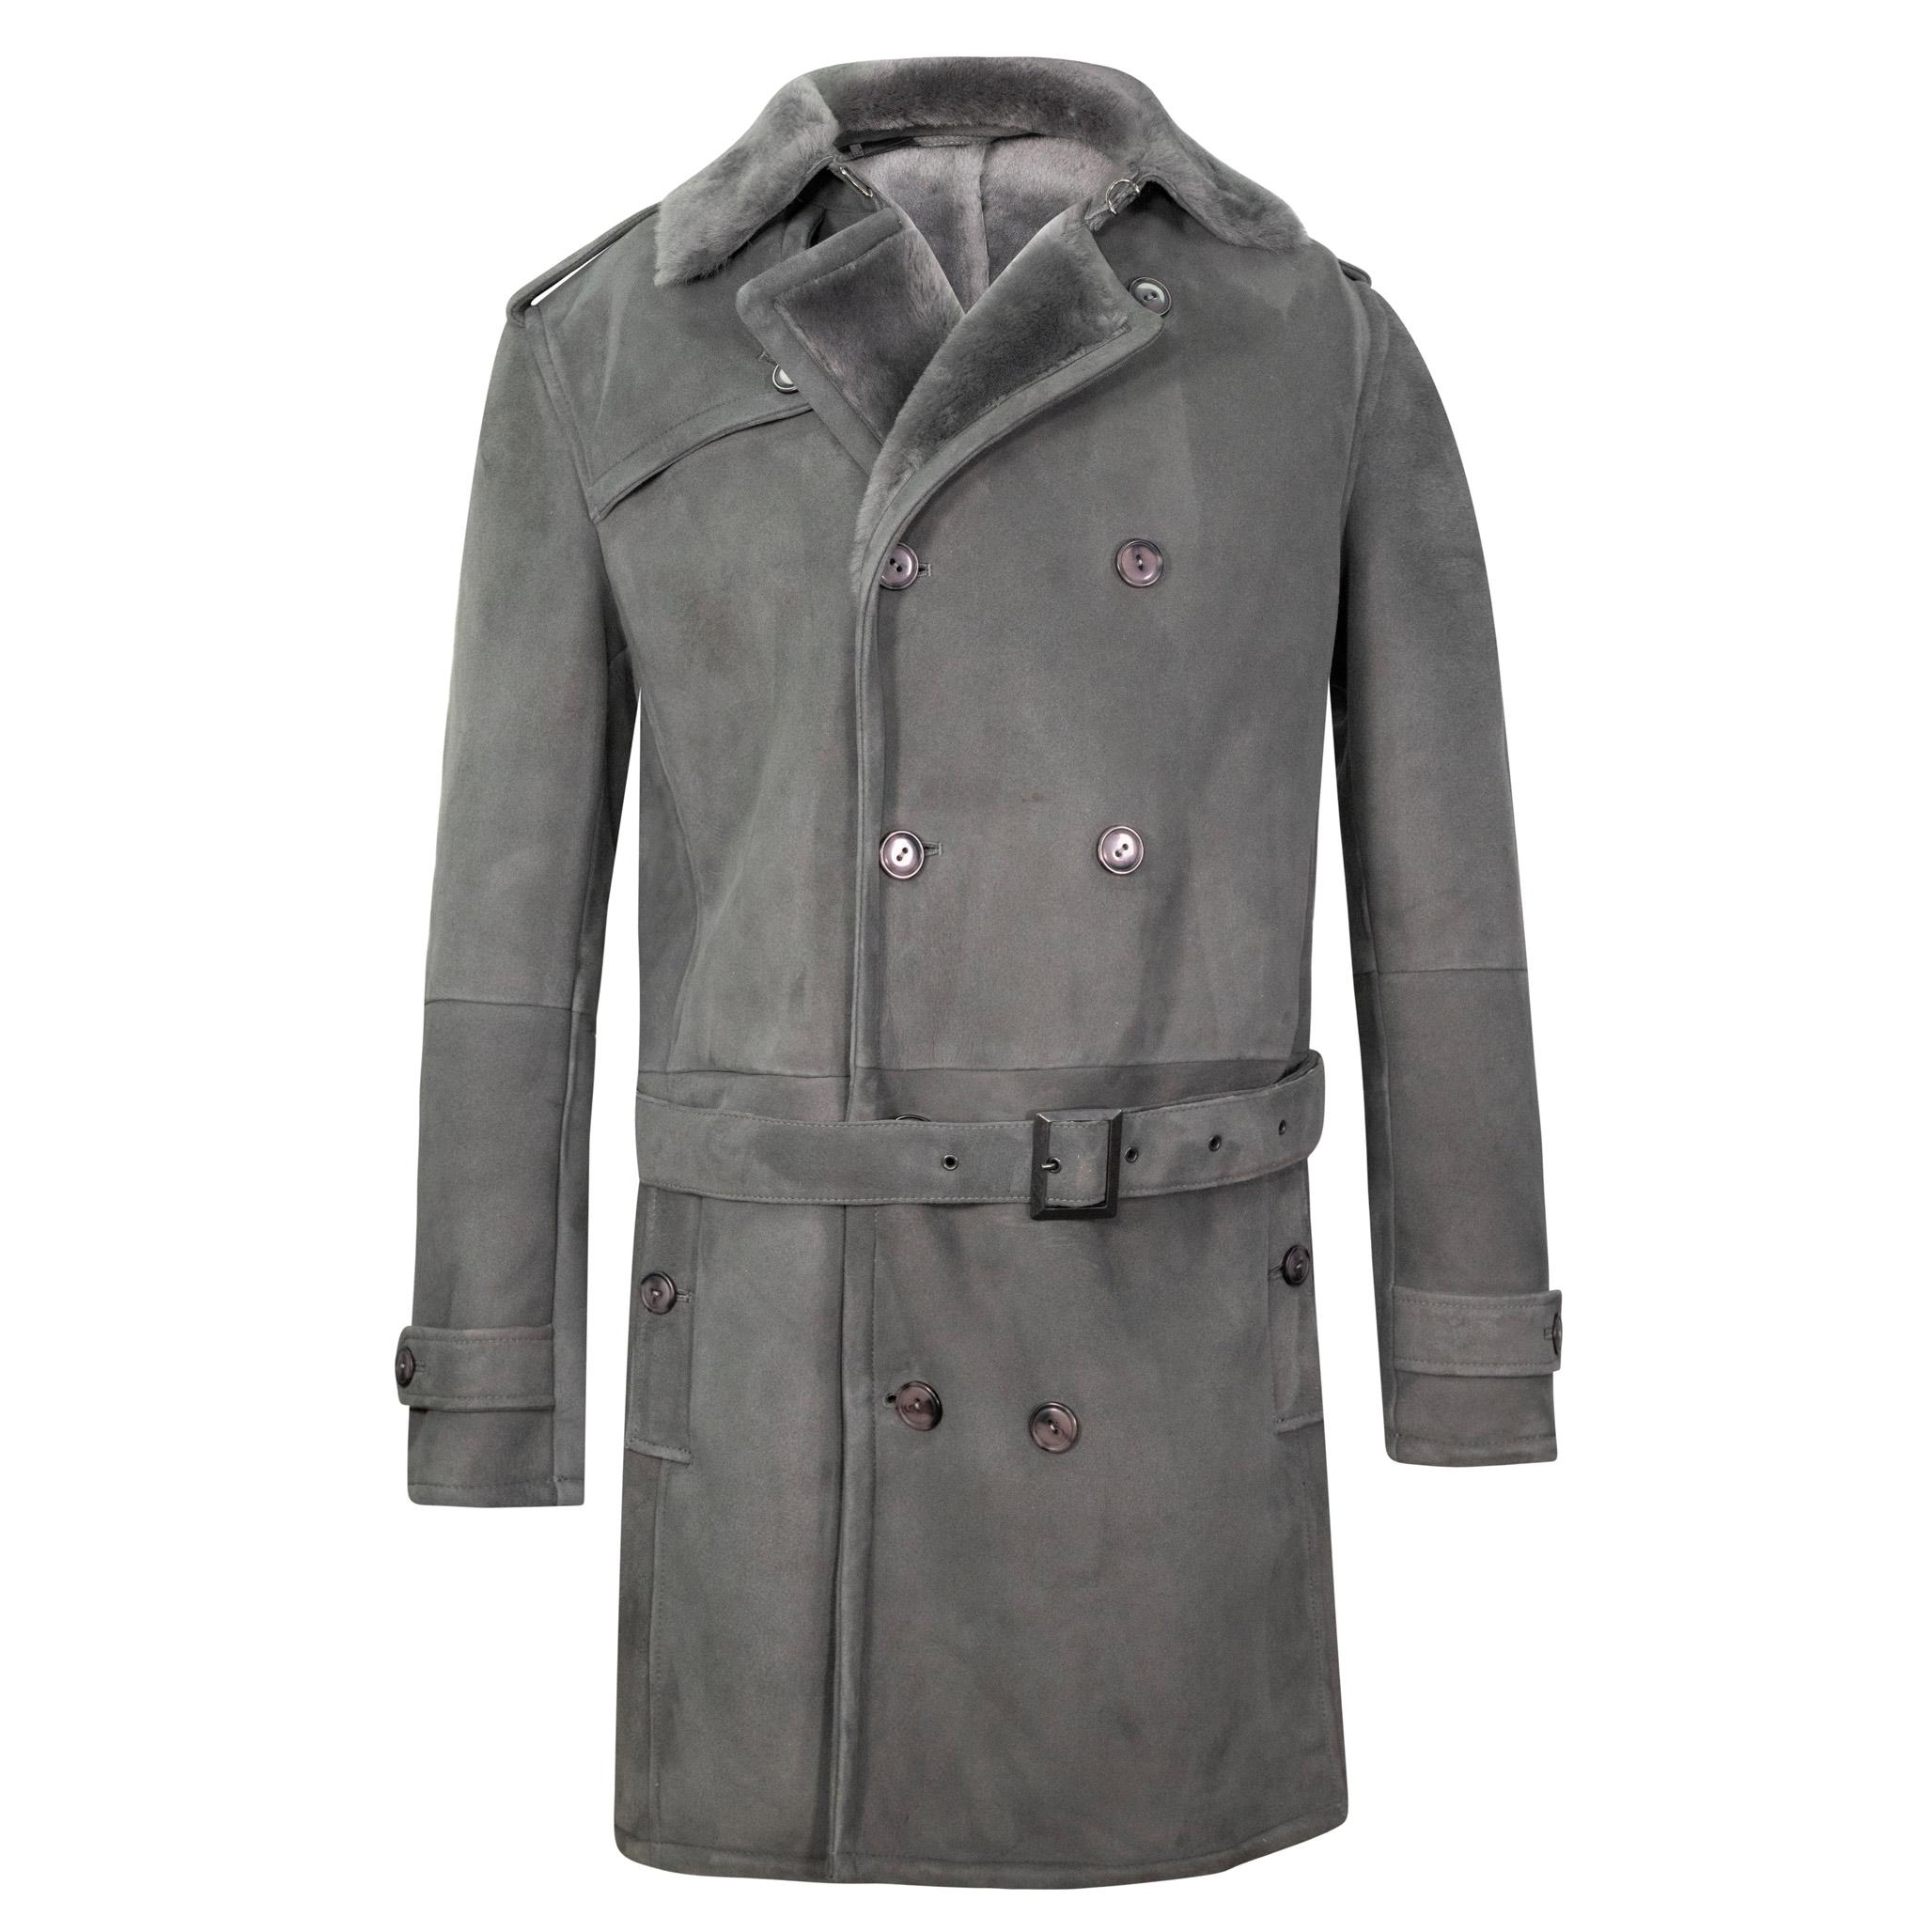 A long, grey, luxury sheepskin coat with a soft suede finish. Both belted and buttoned front fastening